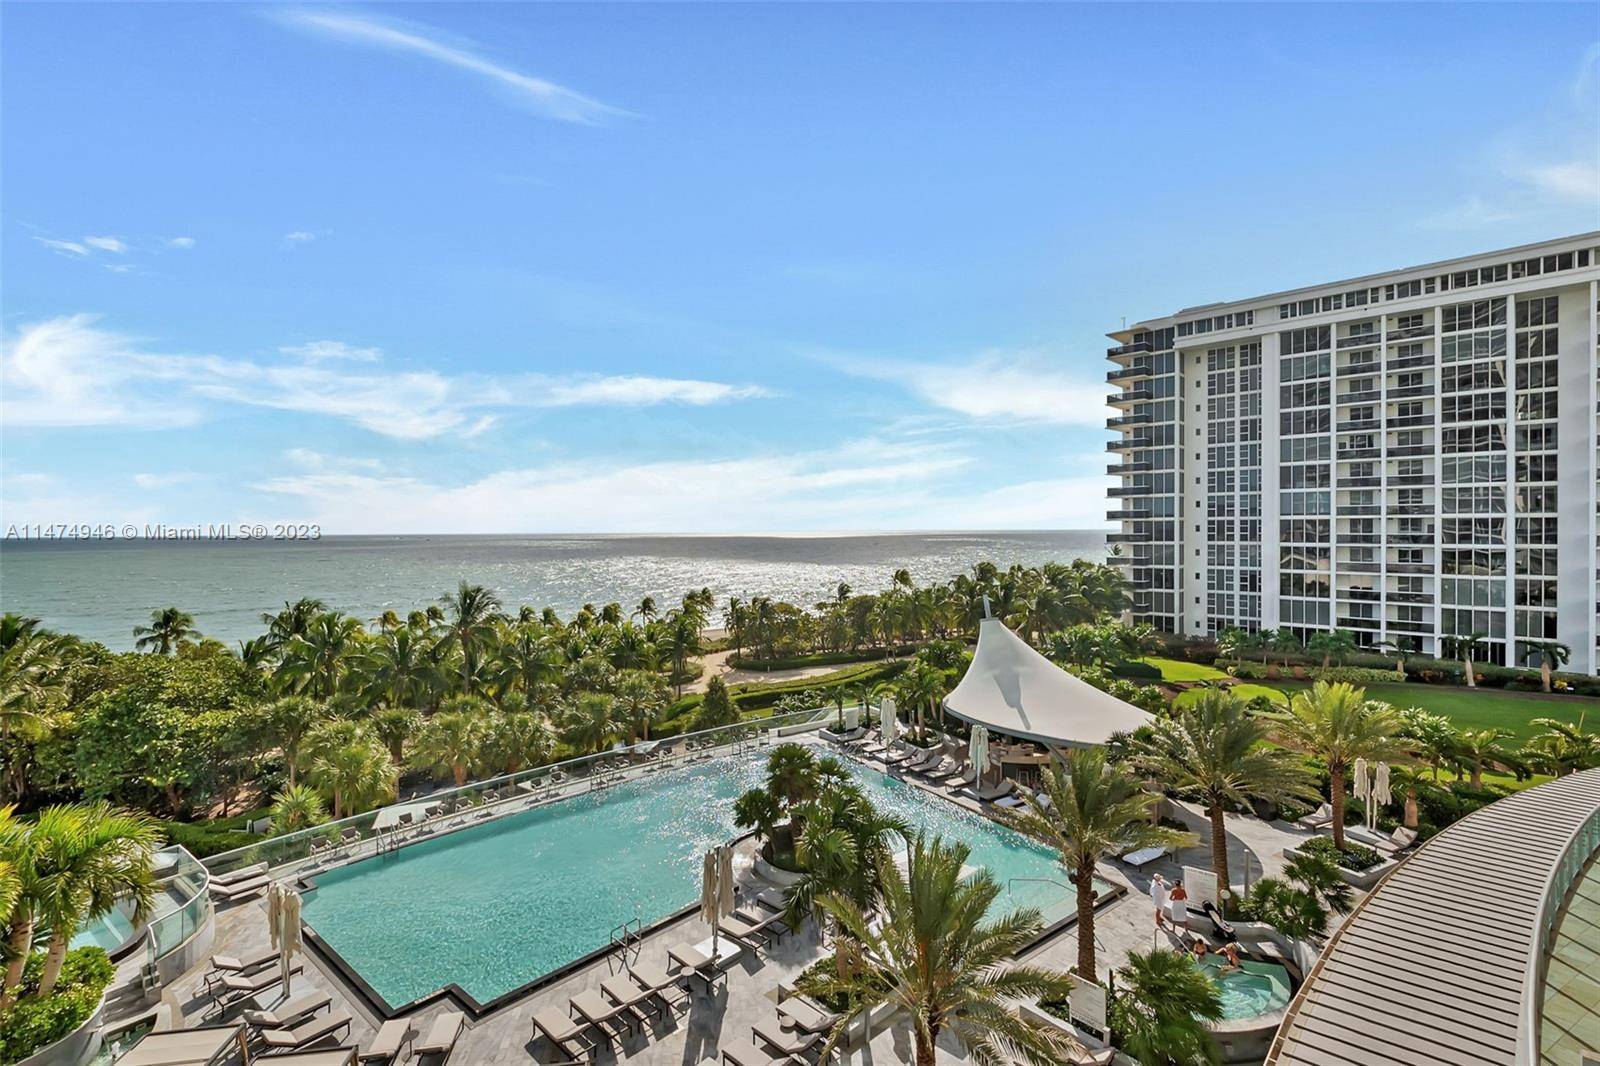 This stunning 2 bedroom Den Third Bedroom, 3 bathroom furnished condo is located in the luxurious One Bal Harbour right next to Ritz Carlton Bal Harbour on Collins Avenue.